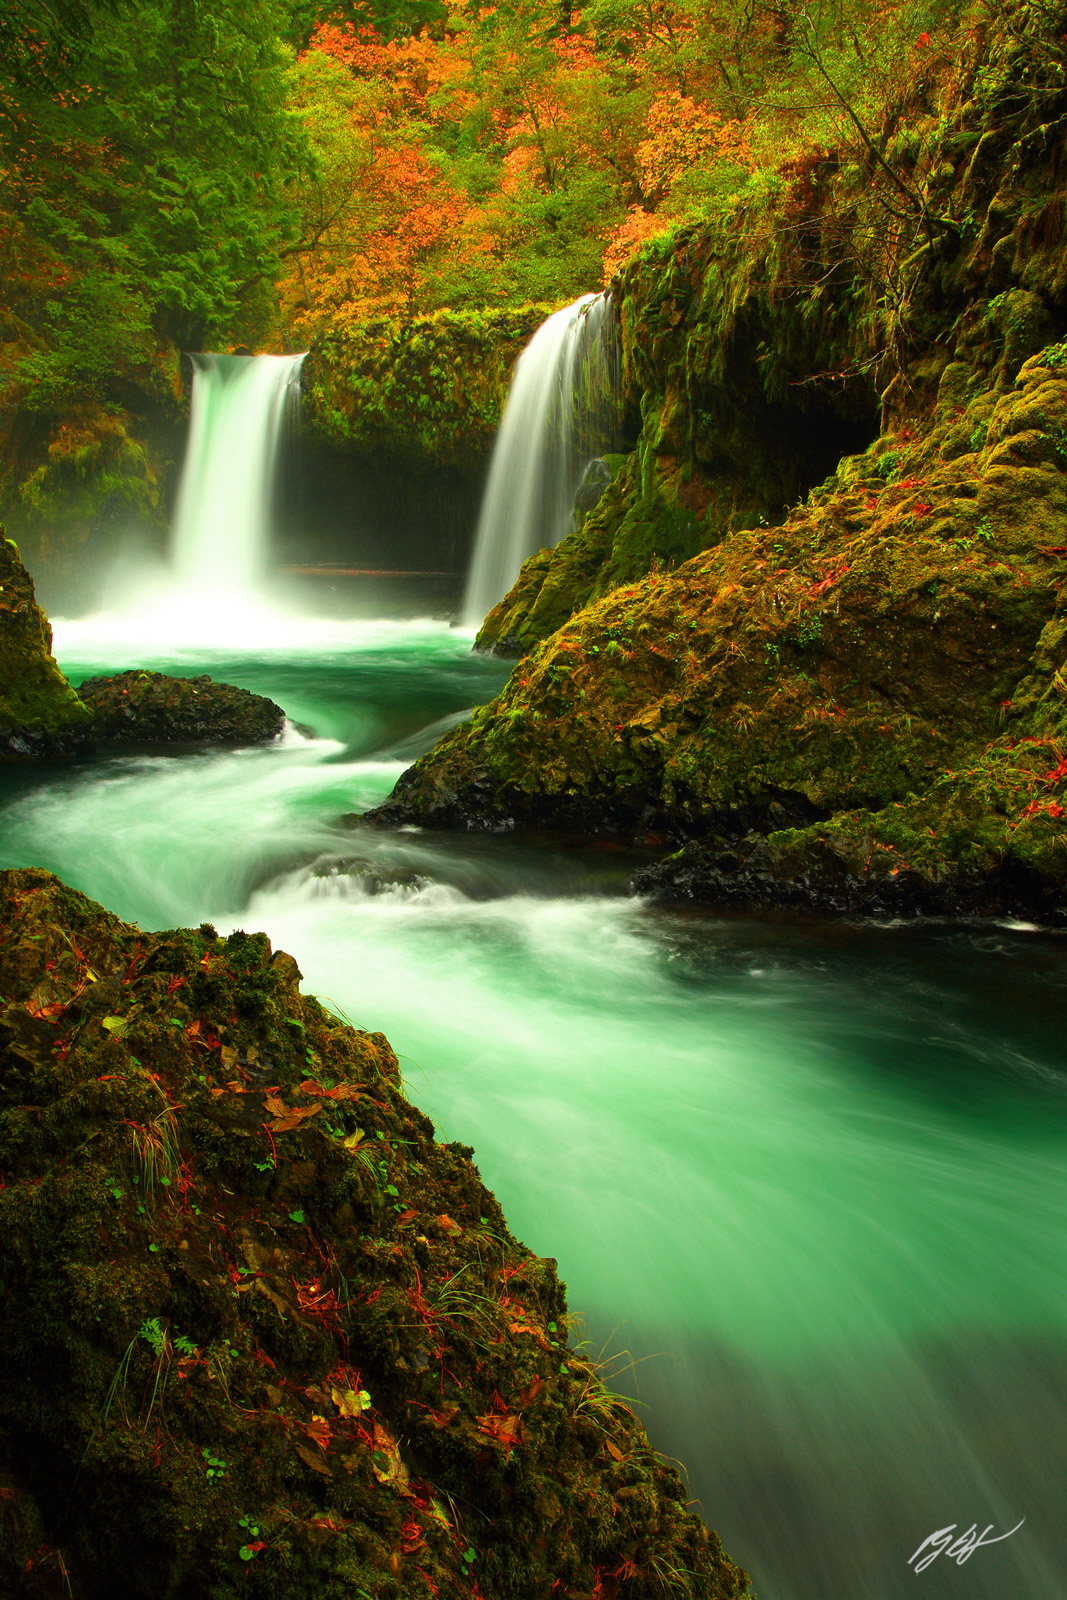 The Emerald Green Water of Spirit Falls in Fall in the Columbia River Gorge in Washington